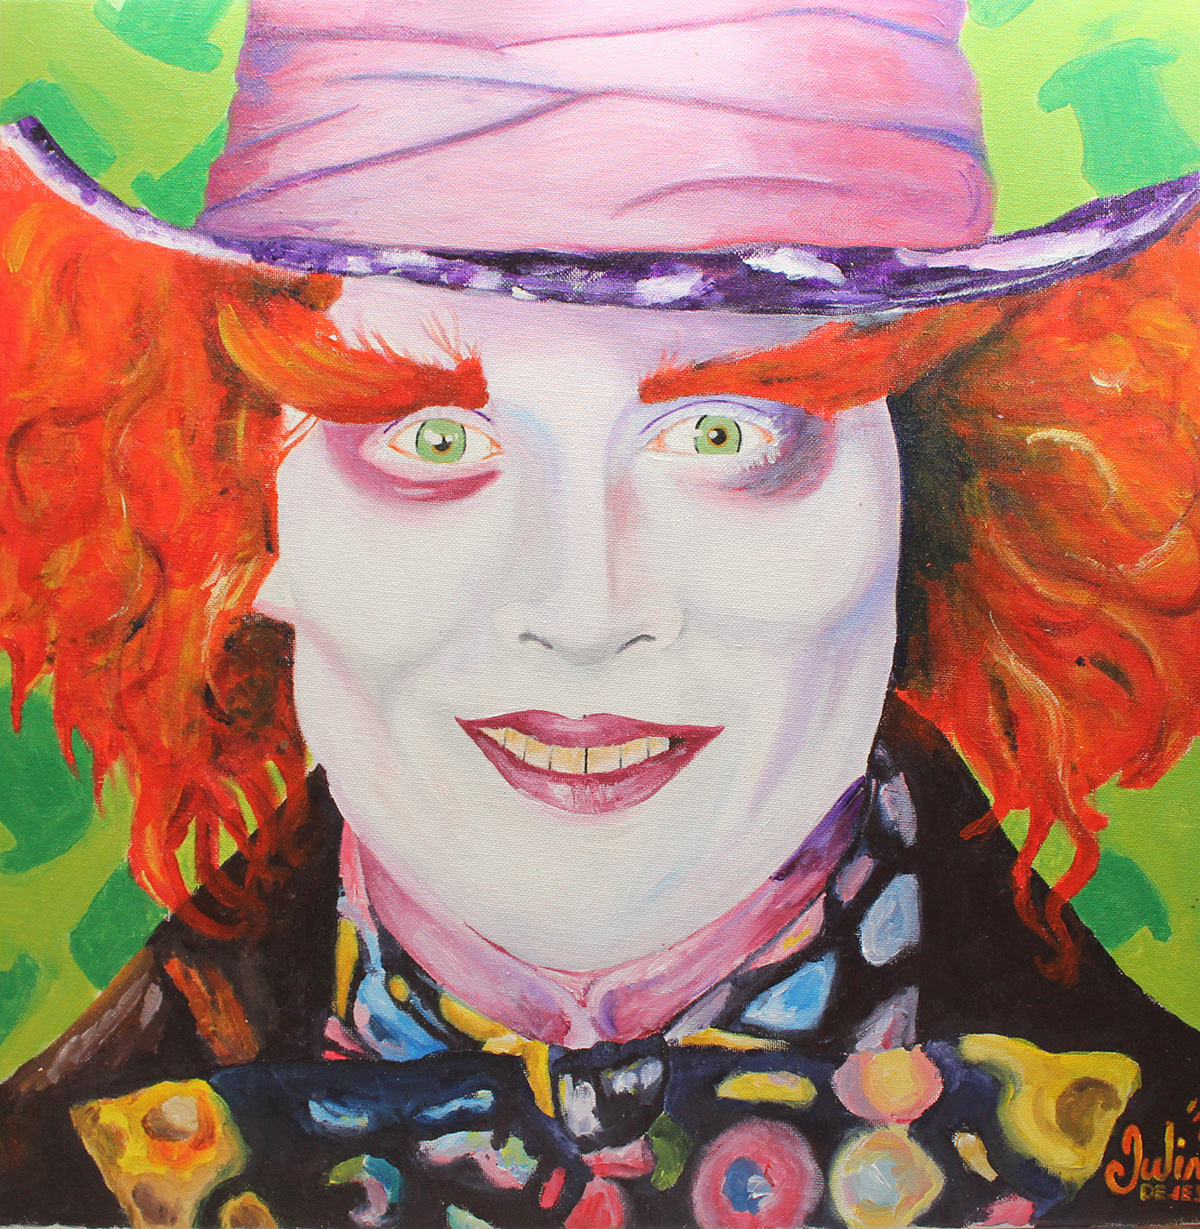 mad hatter alice in wonderland acrylic canvass TRADITIONAL ART fictional character alice johnny depp paint fiction